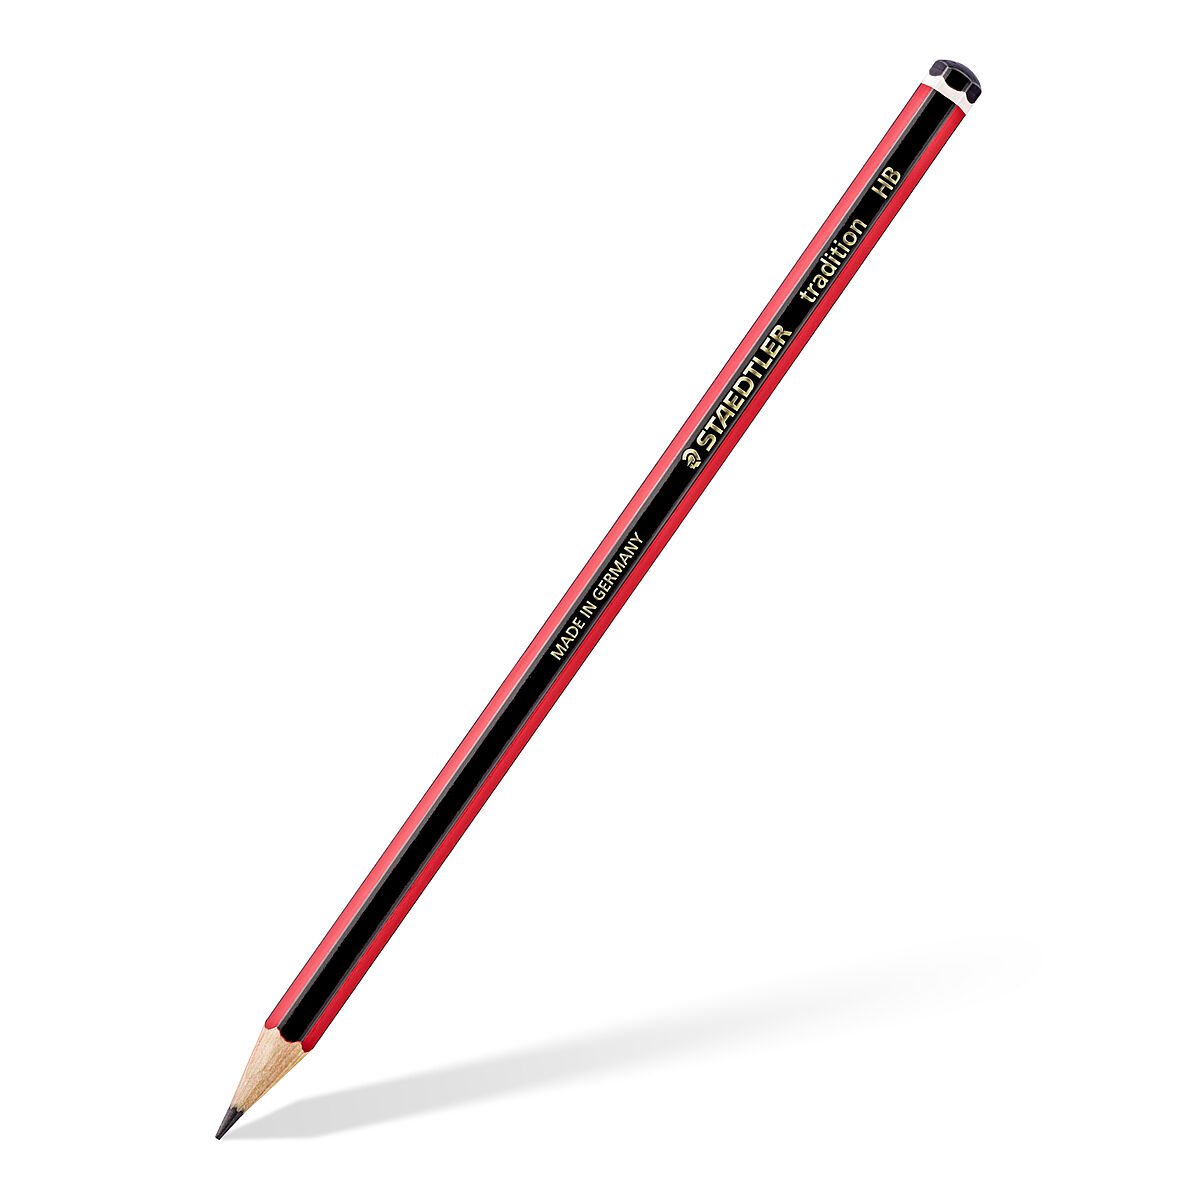 STAEDTLER 110-2H Tradition Graphite Pencil for Drawing & Sketching - 2H  (Box of 12), Black